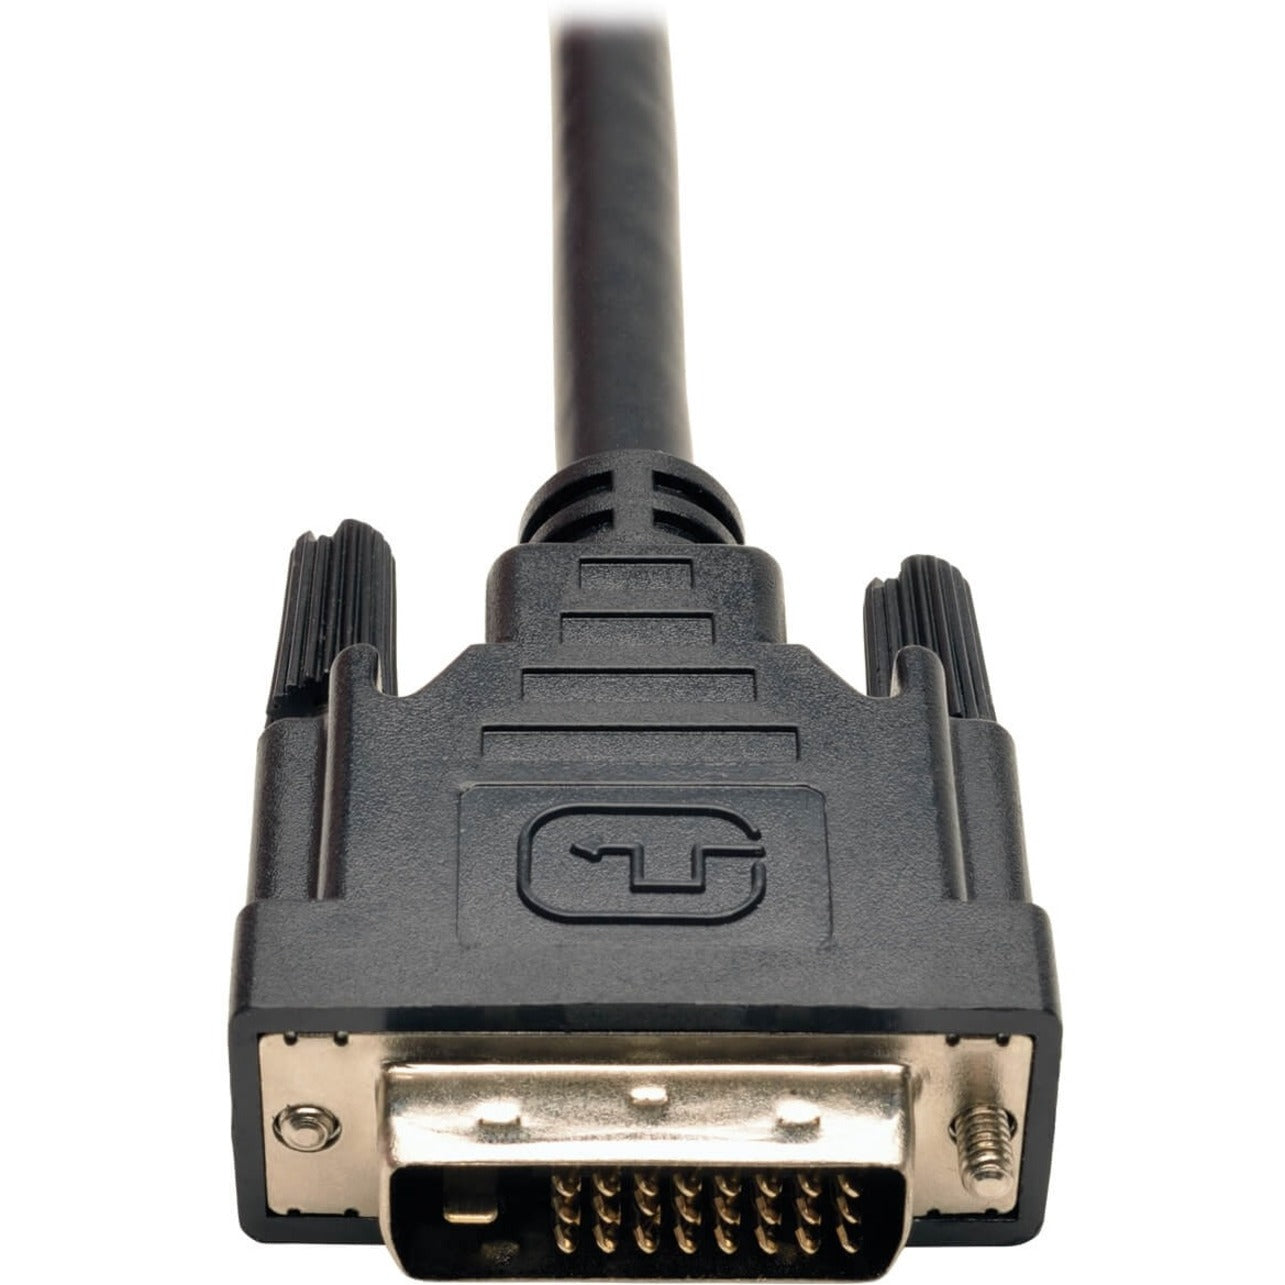 Tripp Lite P564-001 DVI Dual Link Splitter Cable, 1 ft, Two Monitors Display the Same Image from One PC